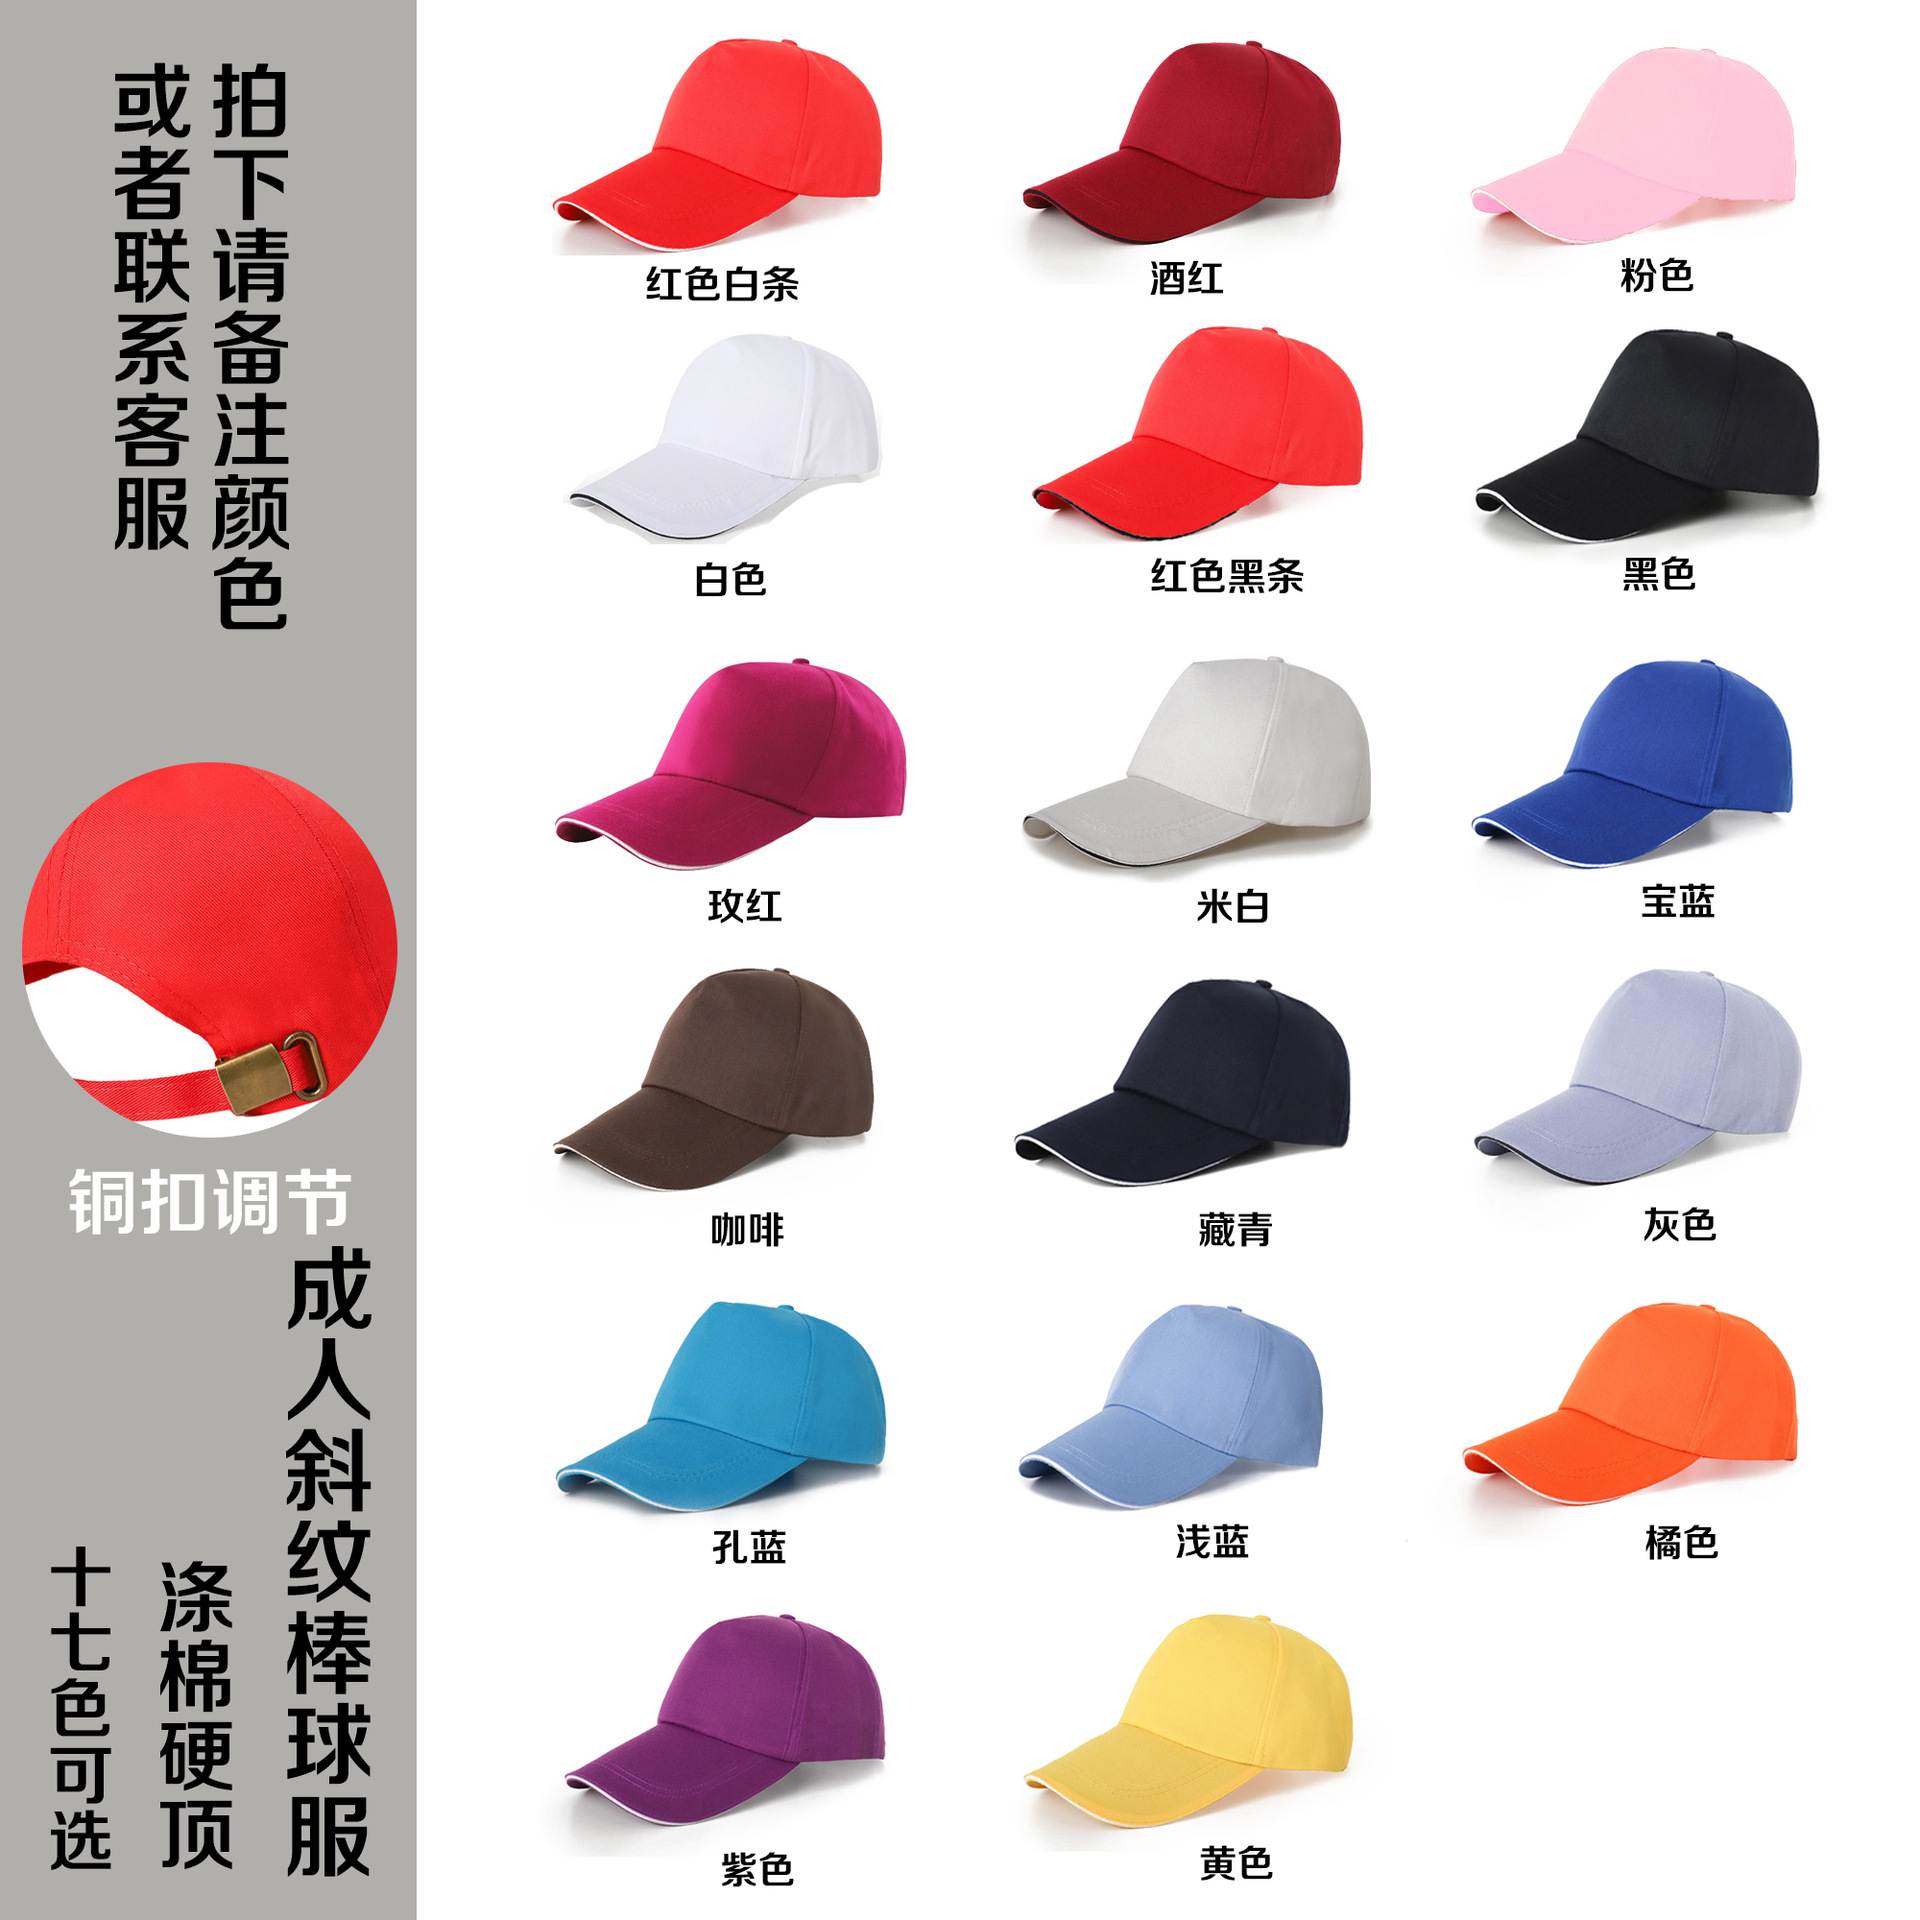 Baseball Hat Custom Printed Logo Embroidery Printing Men and Women All-Match Outdoor Cotton Sun-Proof Children's Peaked Cap Customized